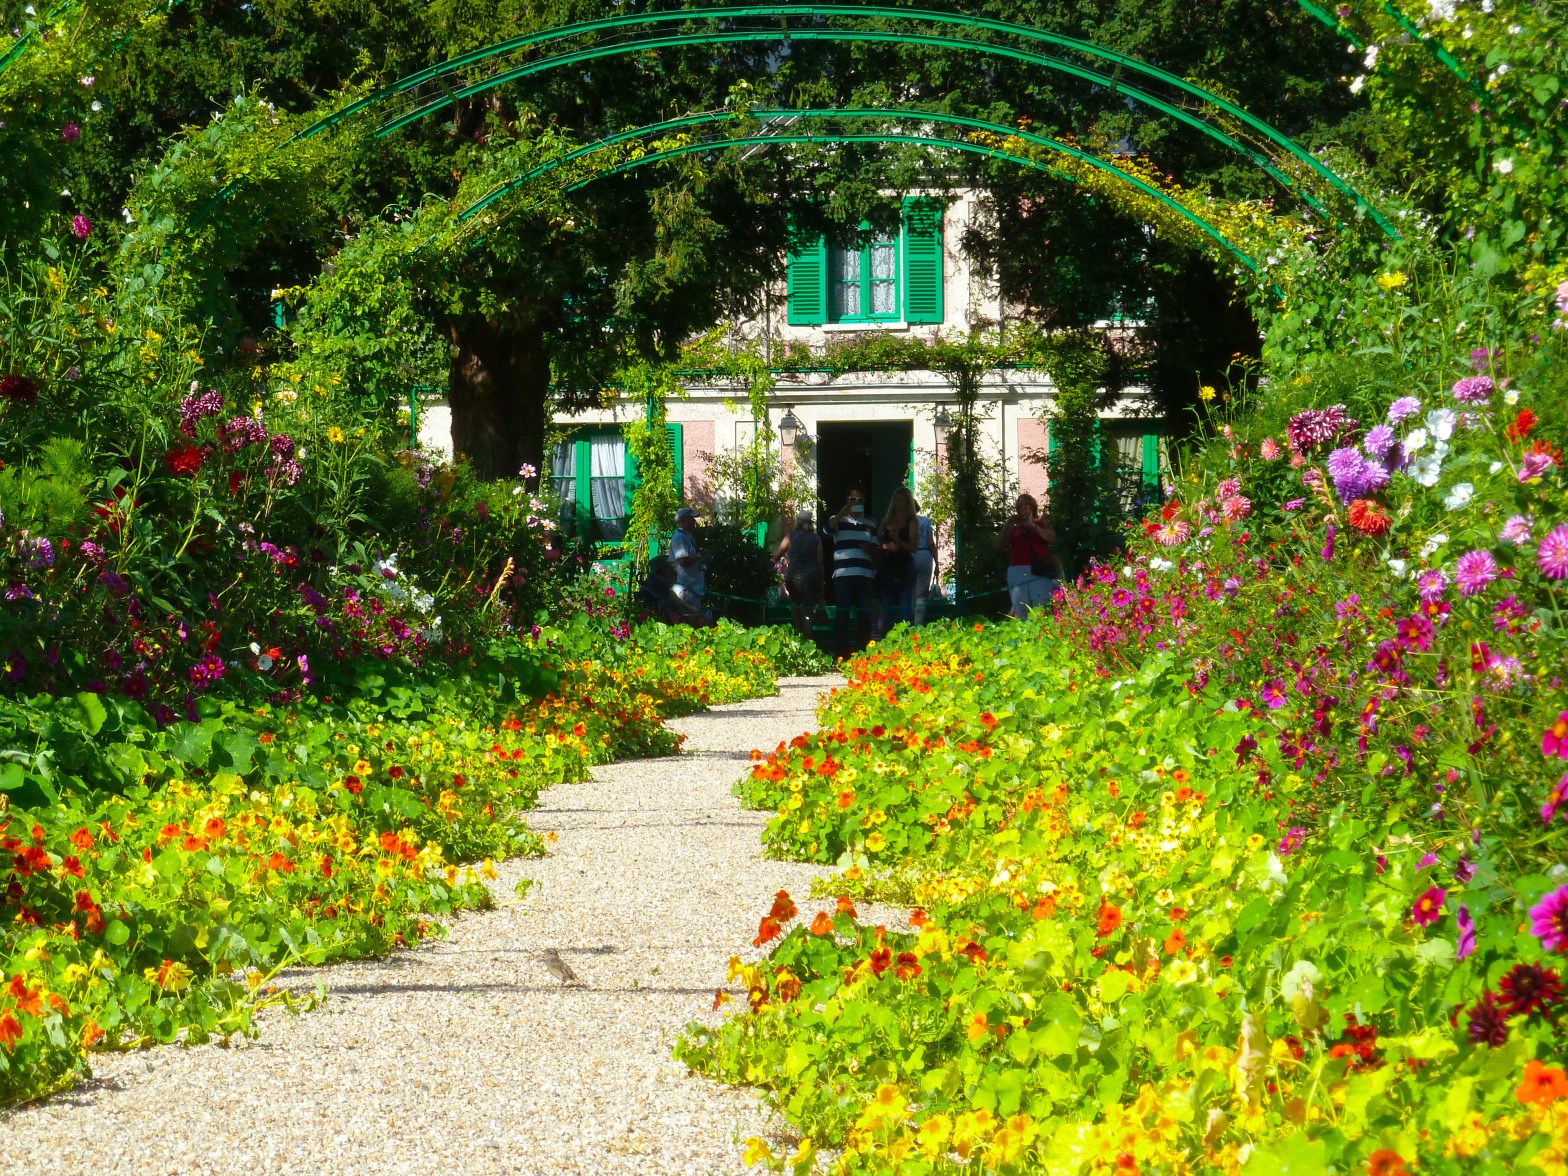 alt="monet house and garden at giverny france french travel guide books"